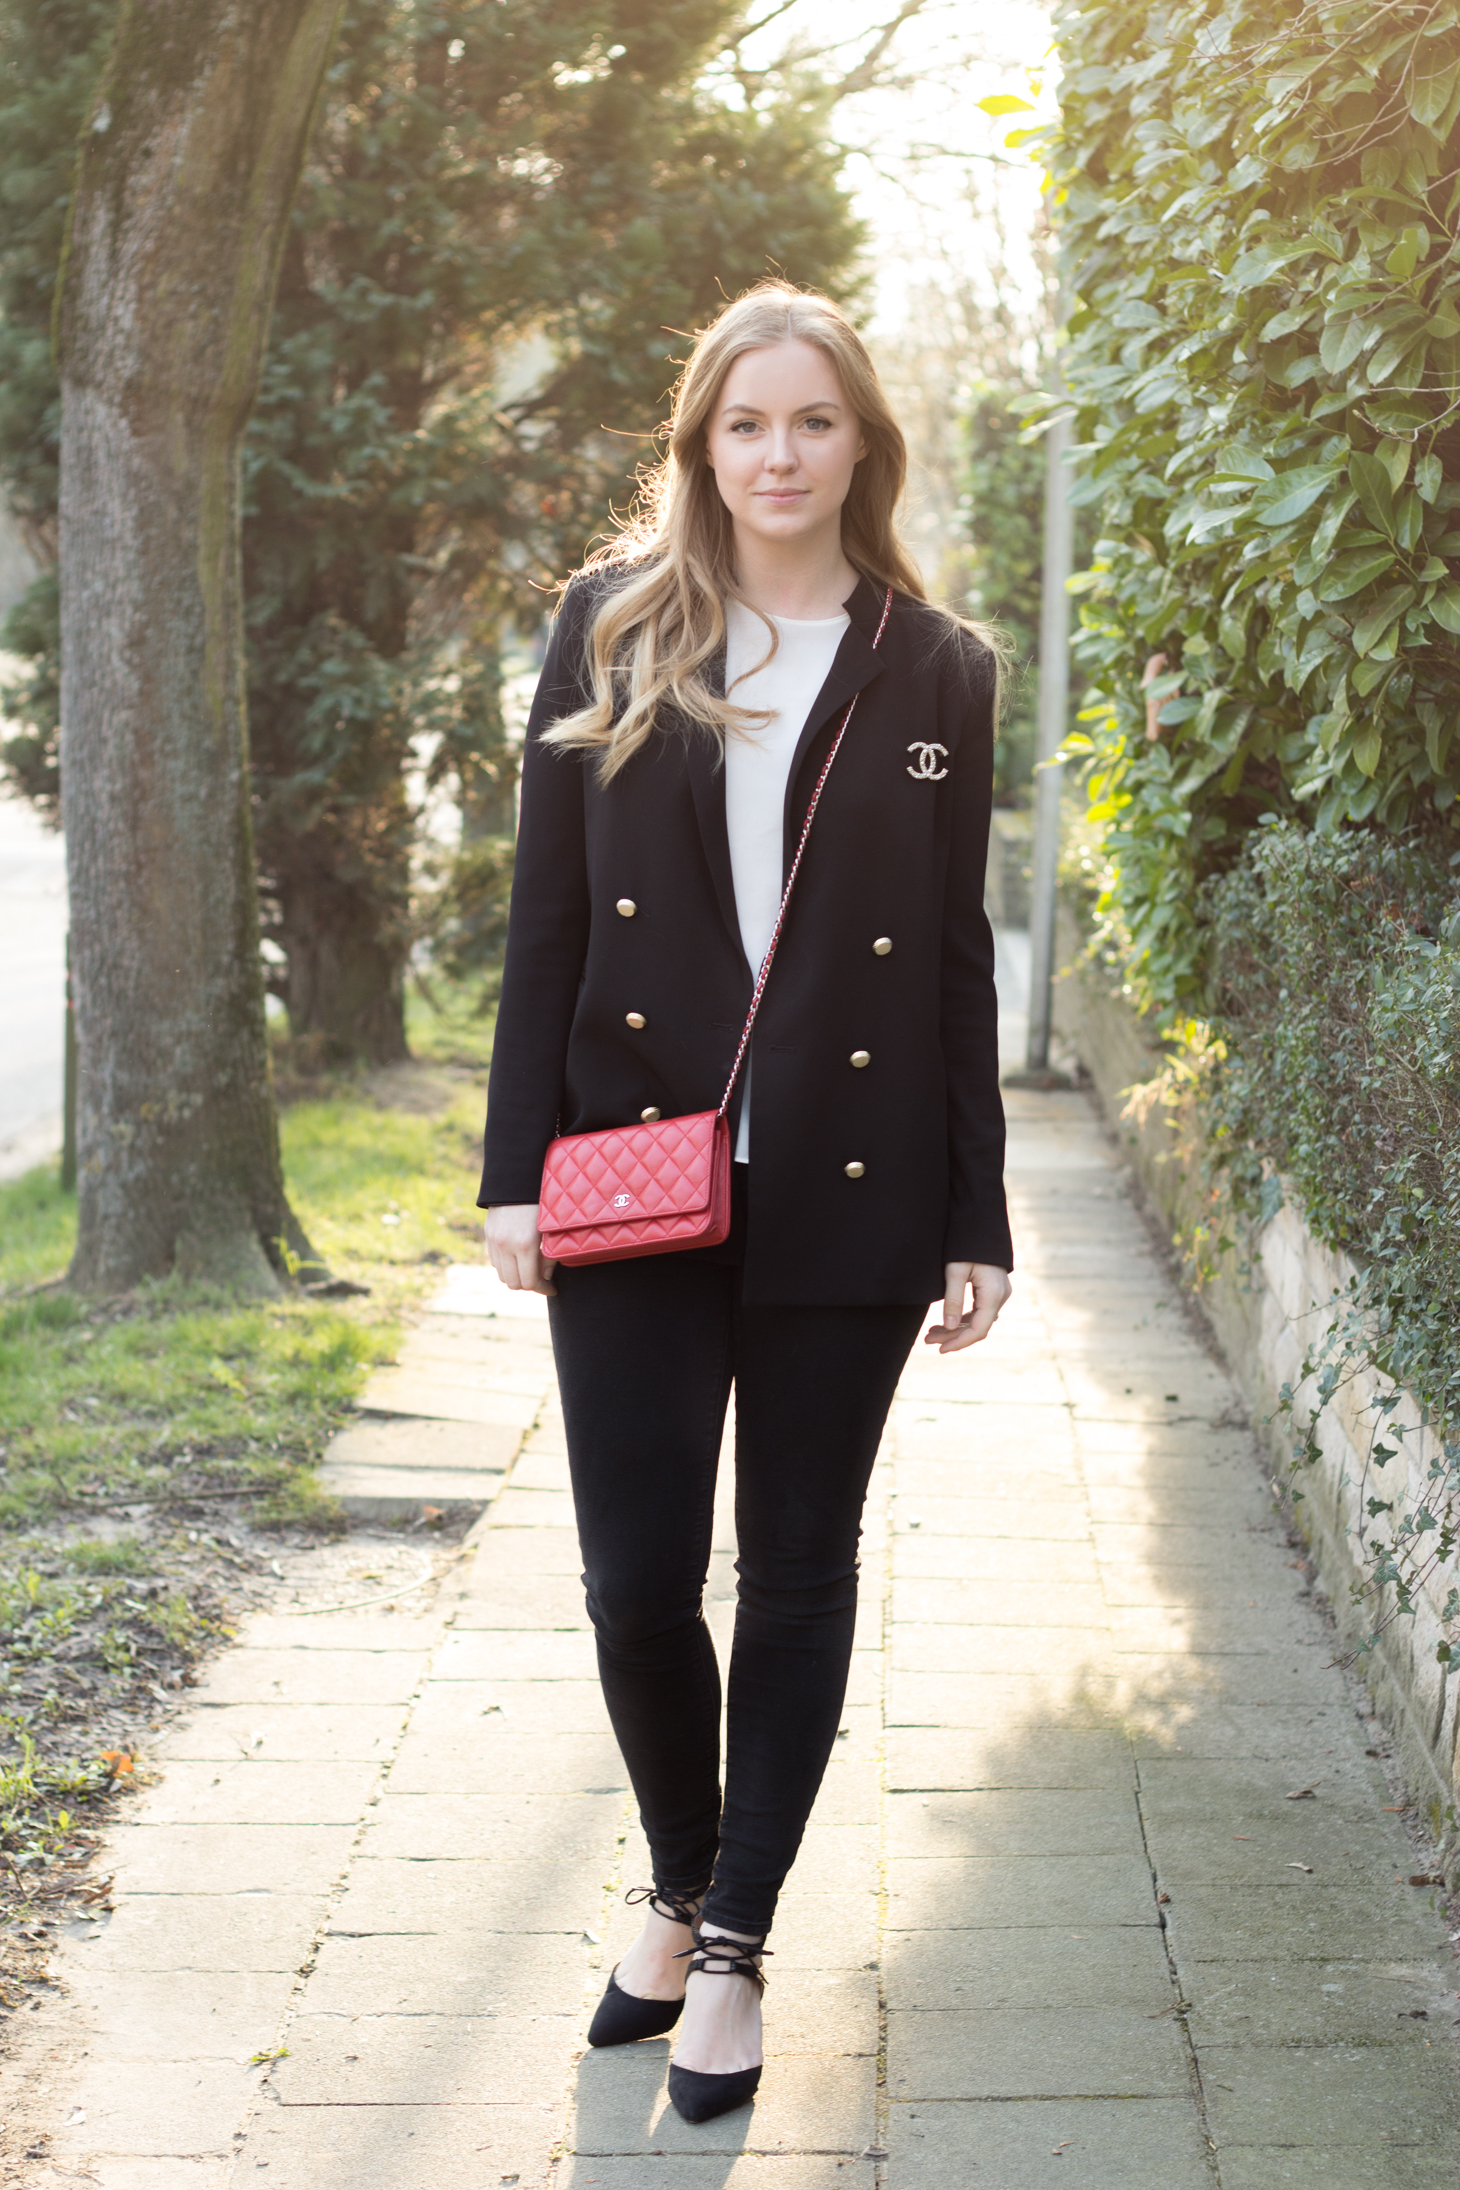 Axelle Blanpain is wearing a Chanel red wallet on chain, H&M blazer, Mango top, American Eagle jeggings & Dorothy Perkins shoes